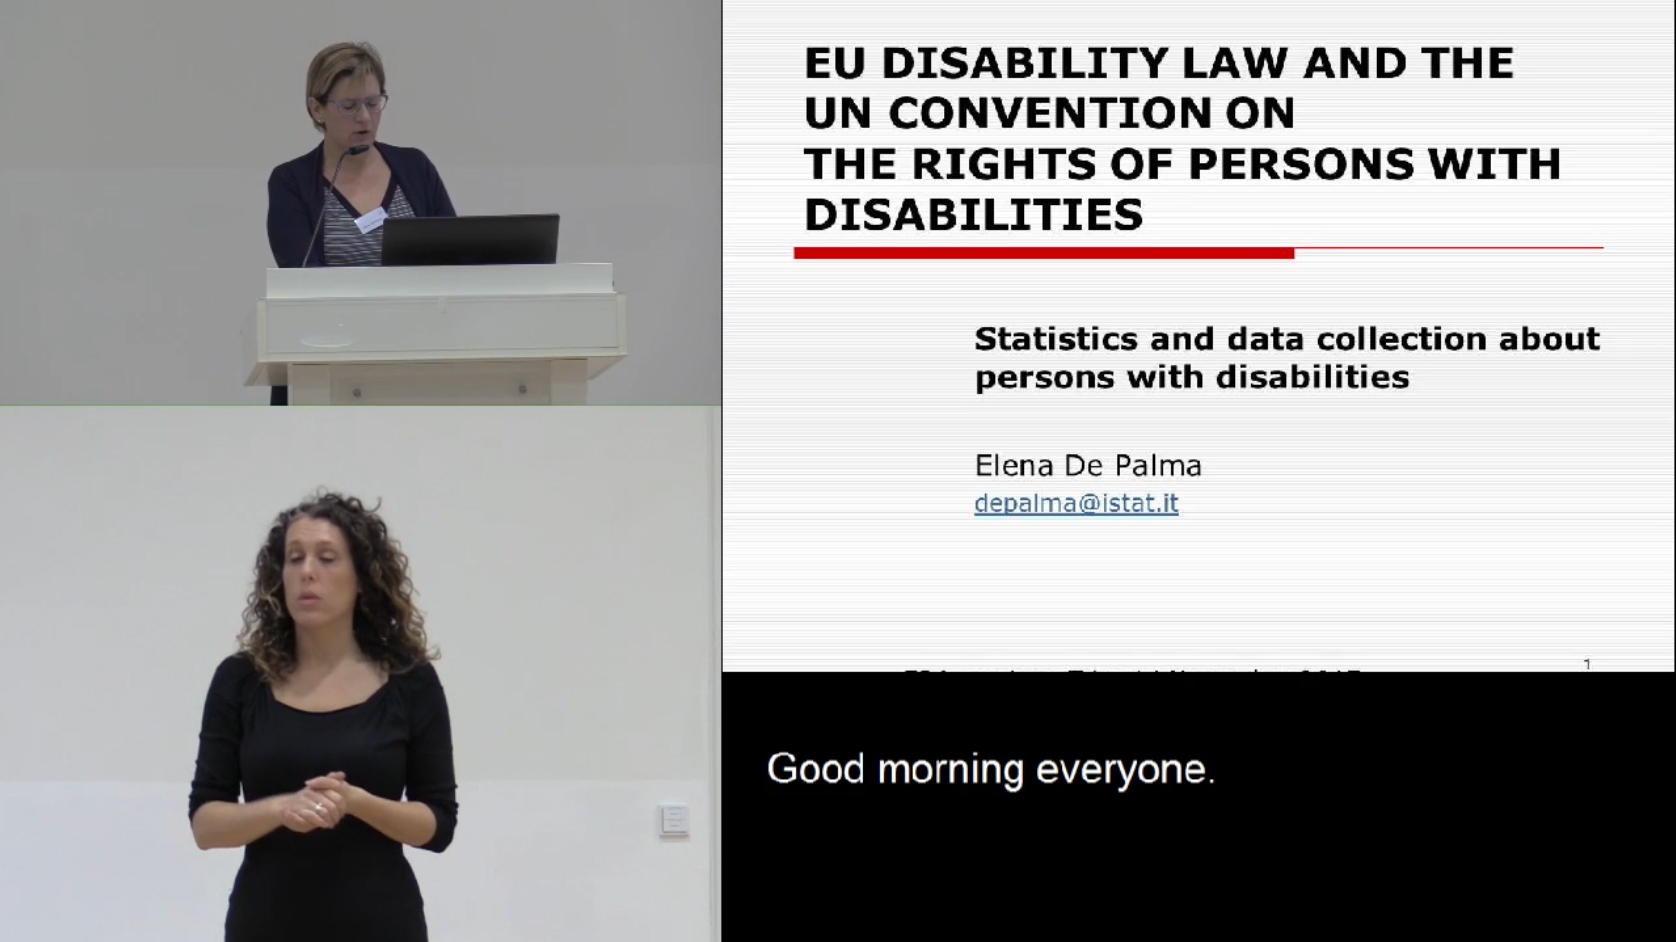 Foto: Elena de Palma: Statistics and data collection about persons with disabilities